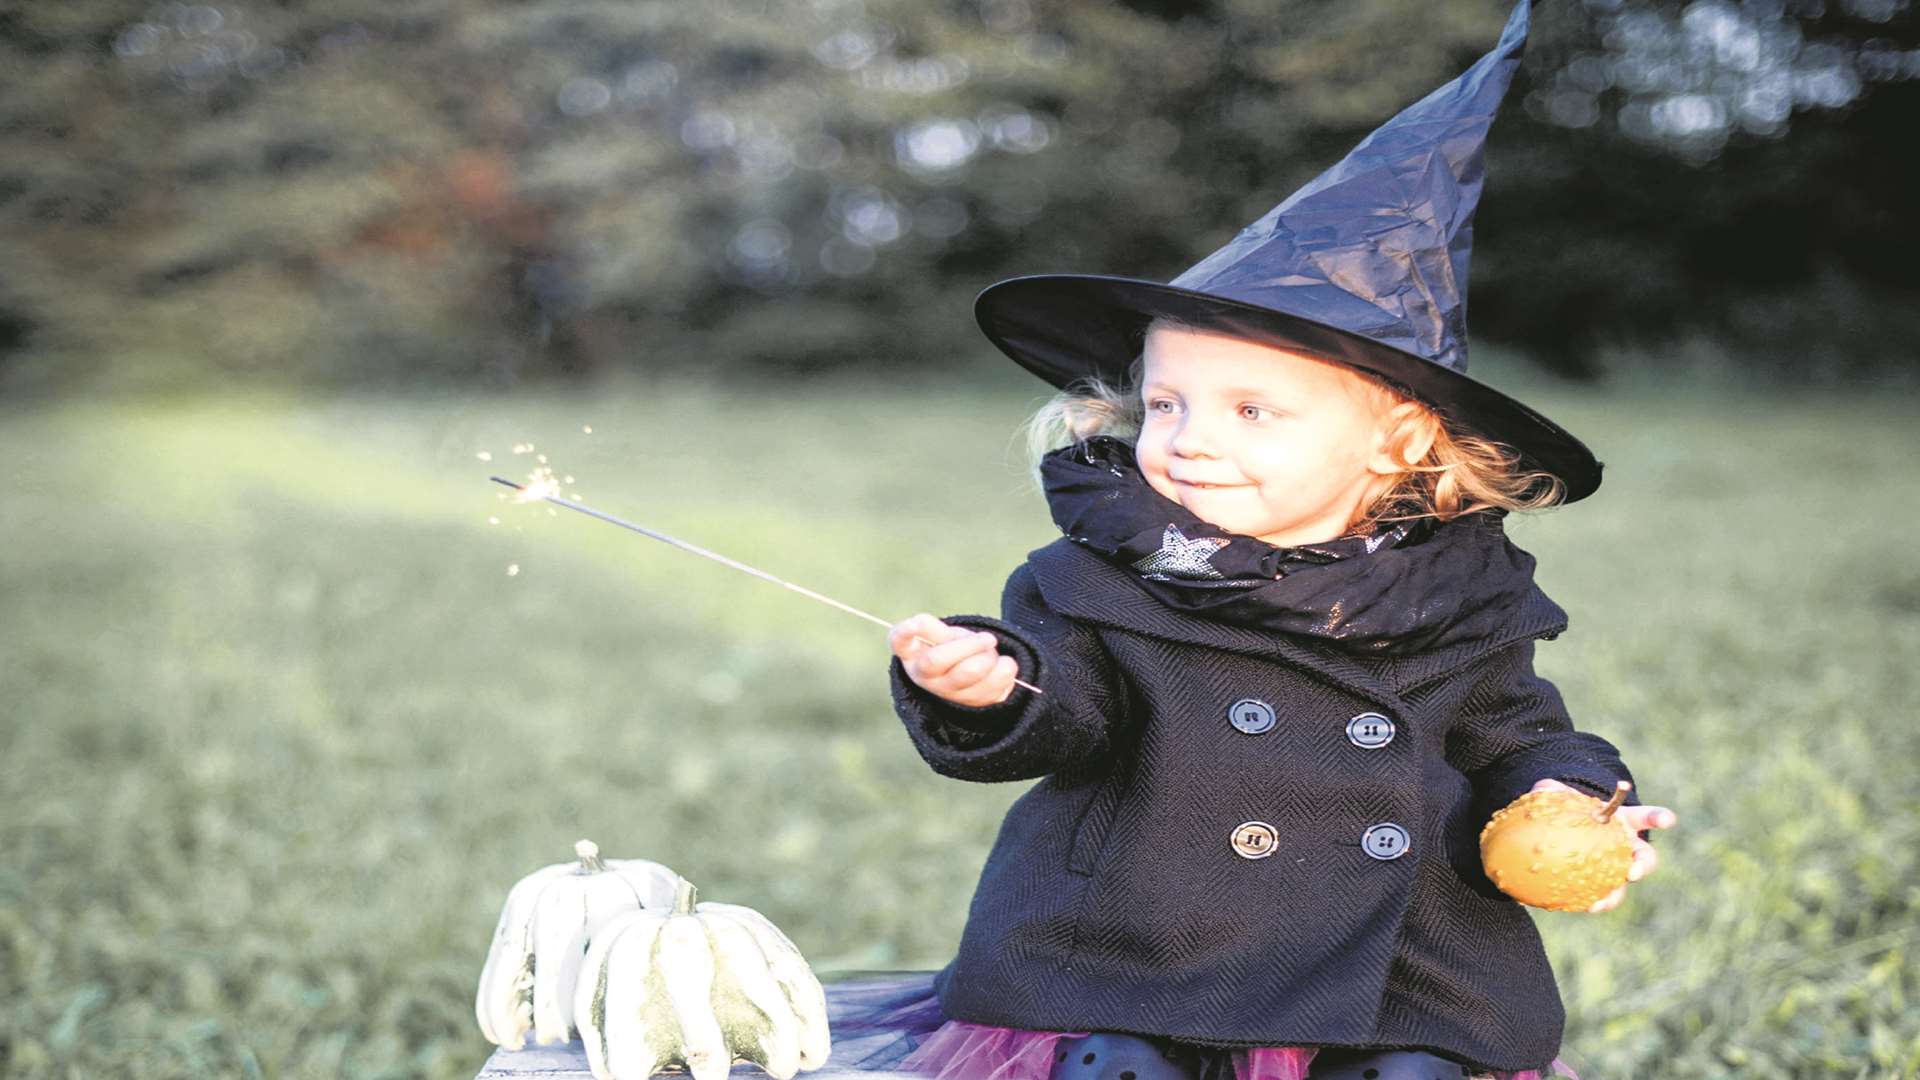 There's so much happening at October half term across Kent